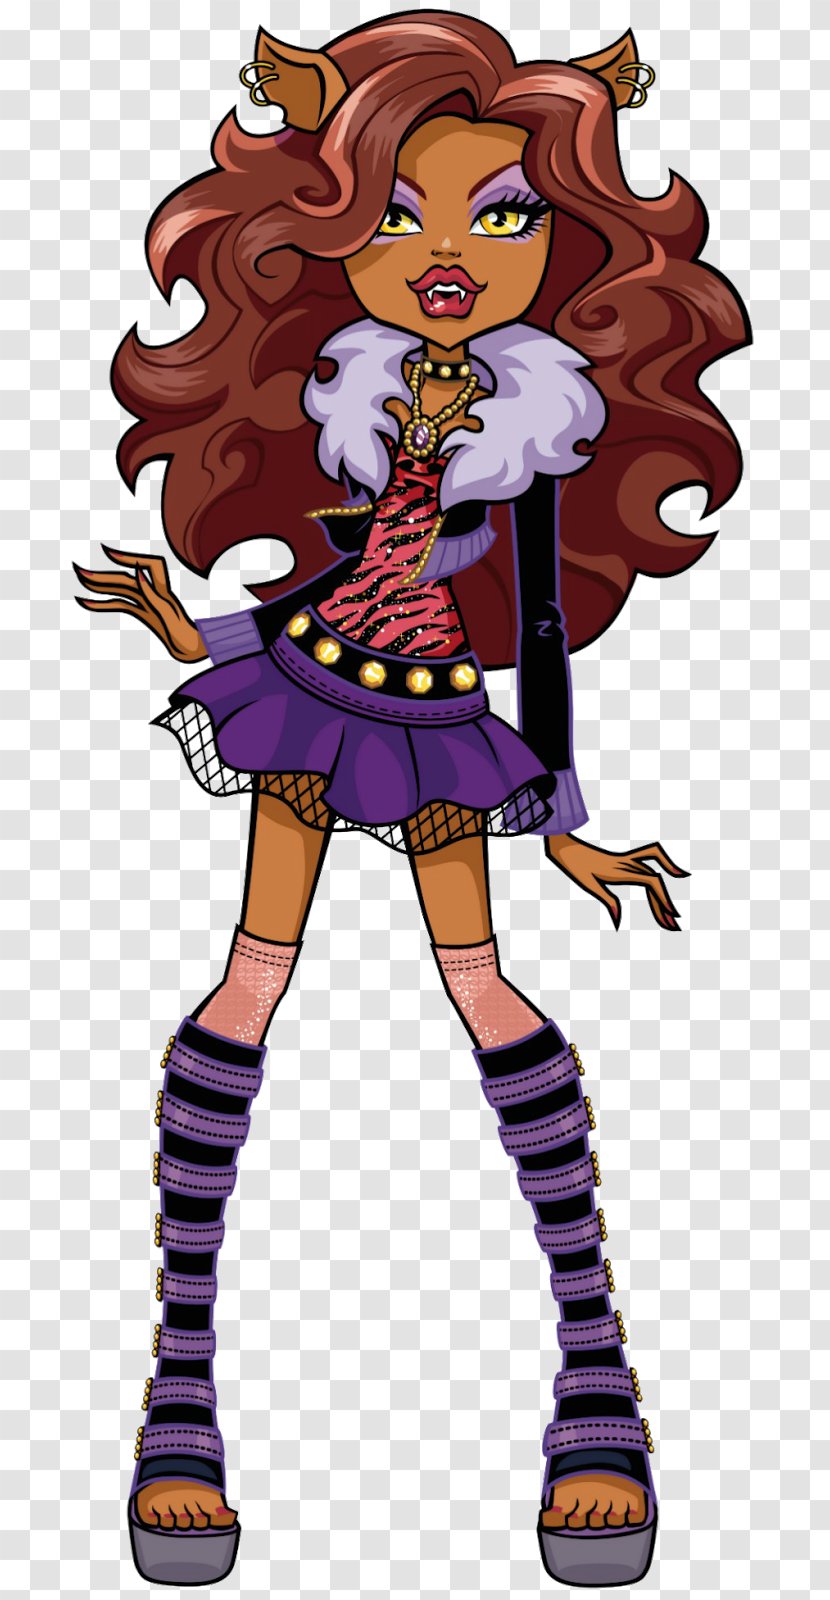 Monster High Clawdeen Wolf Doll Cleo DeNile Frankie Stein - Mythical Creature Transparent PNG